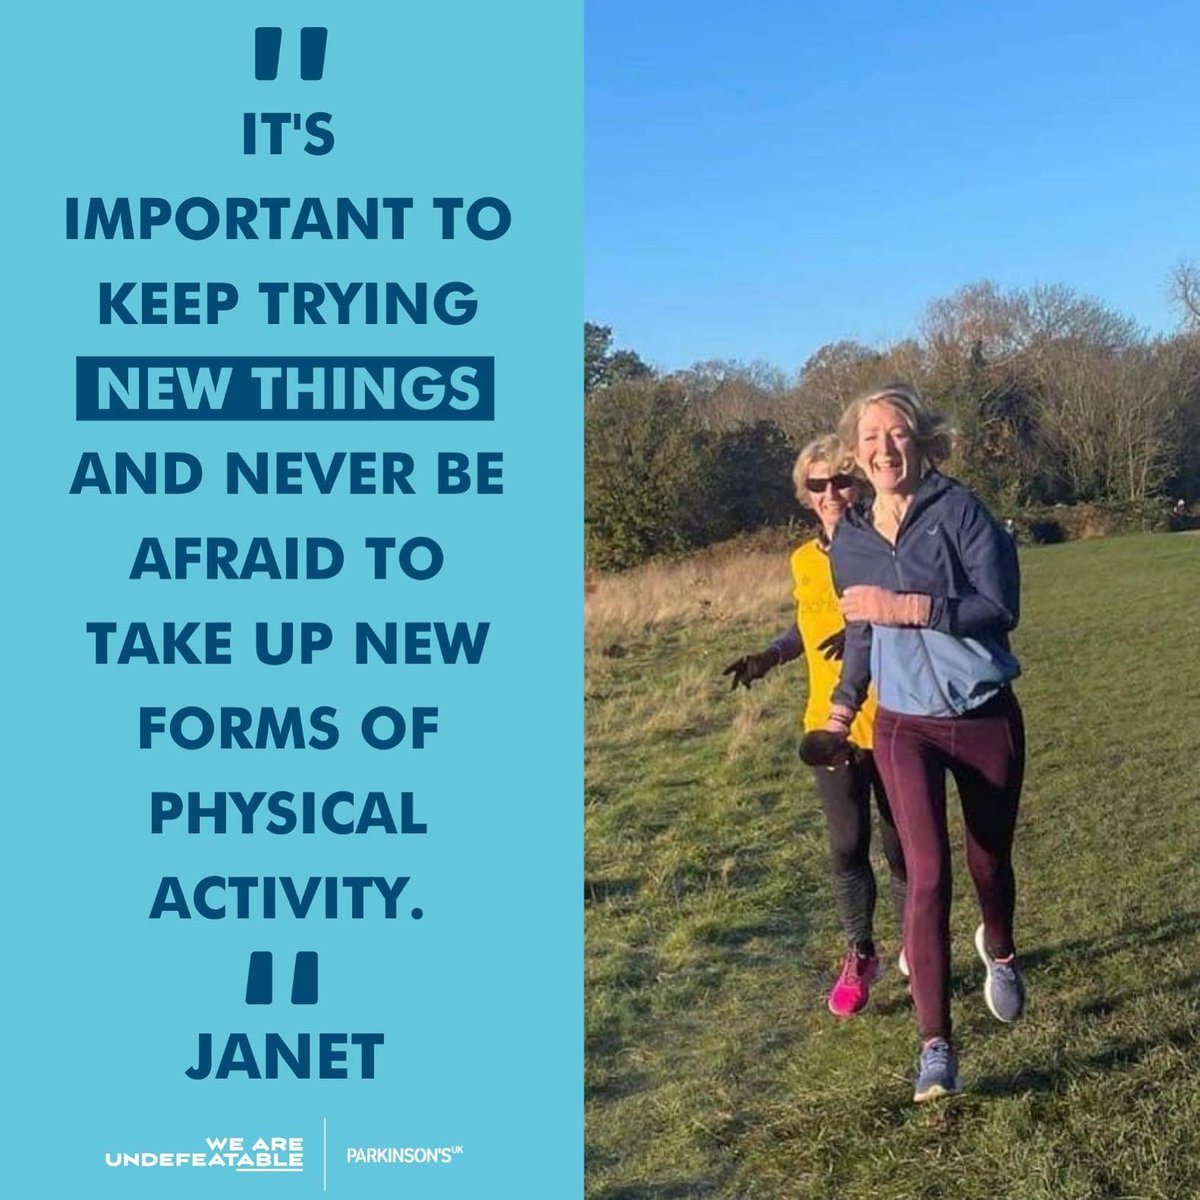 In collaboration with @ParkinsonsUK, we’re sharing how Janet stays active this #ParkinsonsAwarenessMonth. Boxing and strength training have given her new motivation since her Parkinson's diagnosis. How has moving with others supported you in managing your condition?